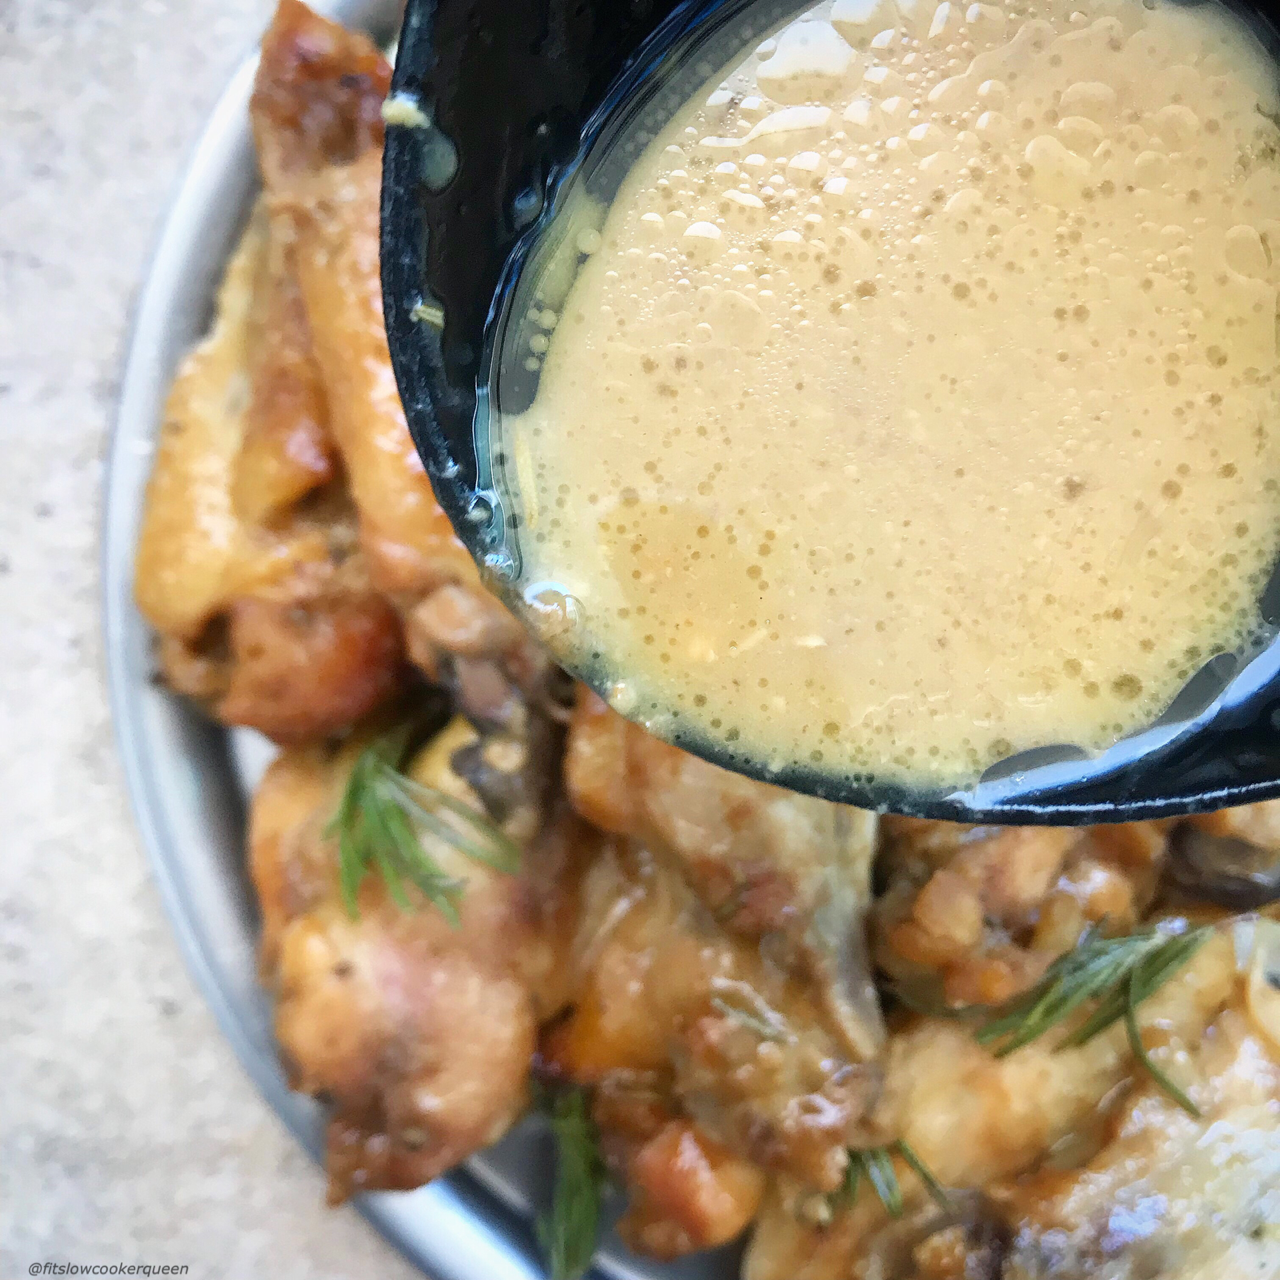 A homemade, paleo, honey mustard sauce slow cooks with chicken wings in this slow cooker recipe that's the perfect appetizer or game-day snack.